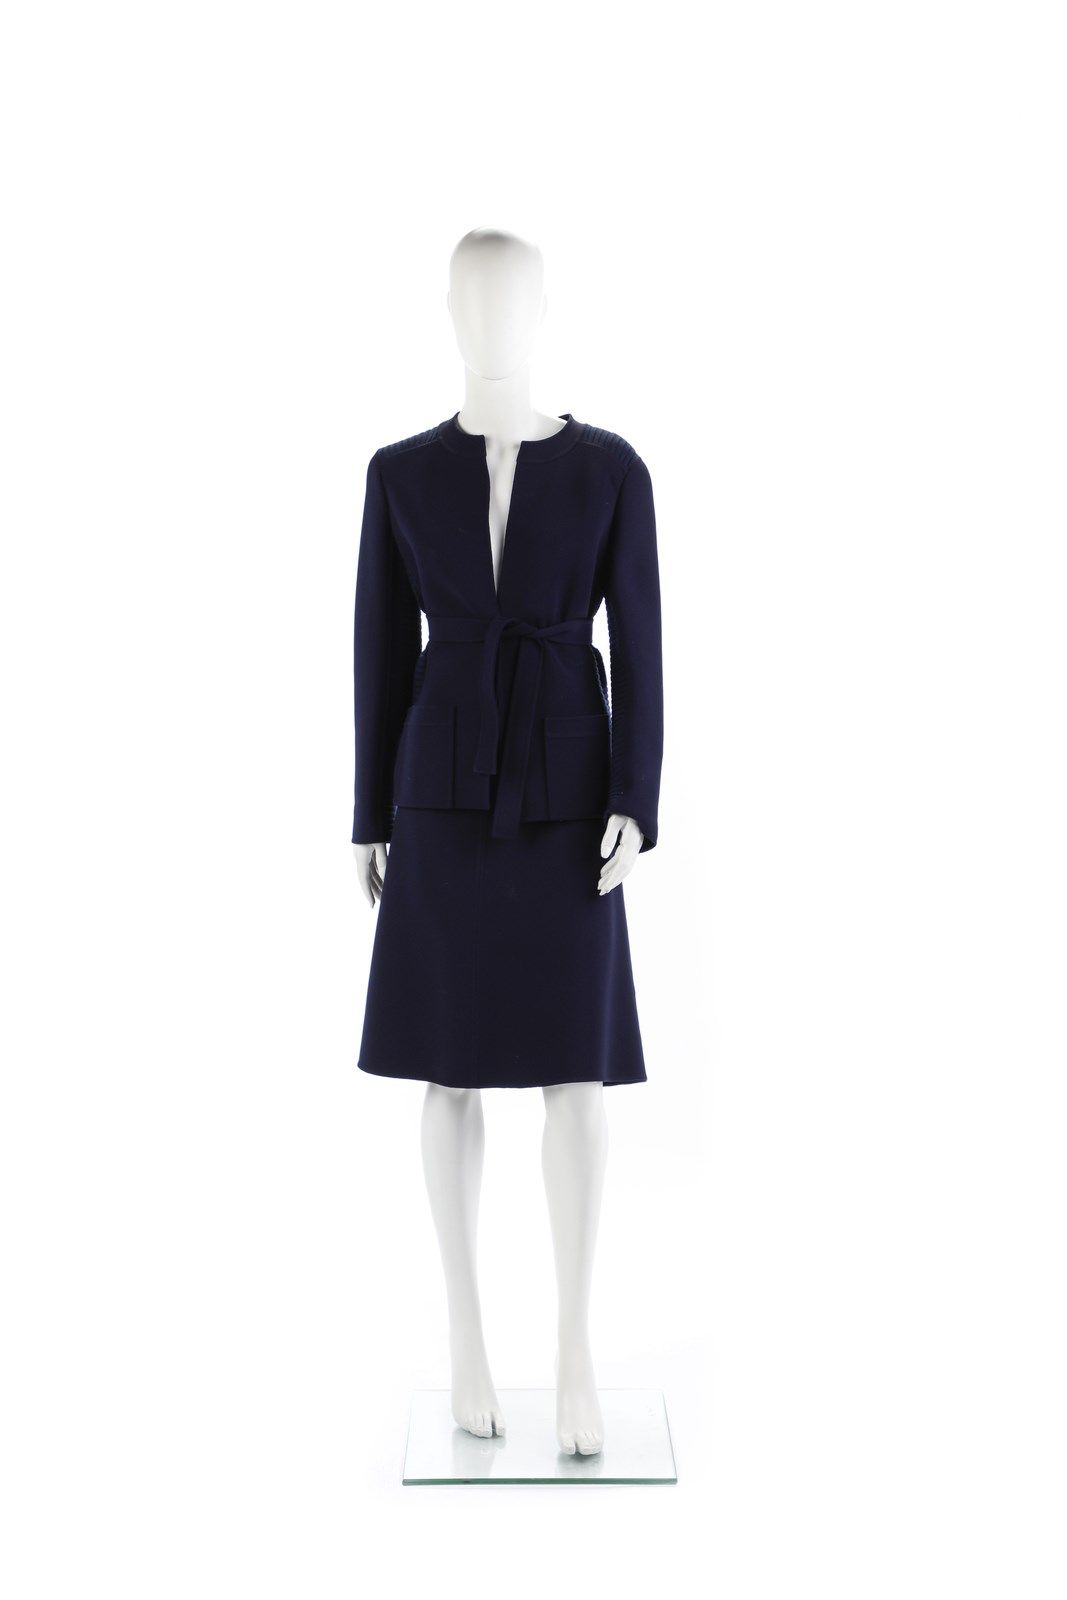 MILA SCHON Dark blue skirt and jacket with belt. Size46IT. Made in Italy. Falda &hellip;